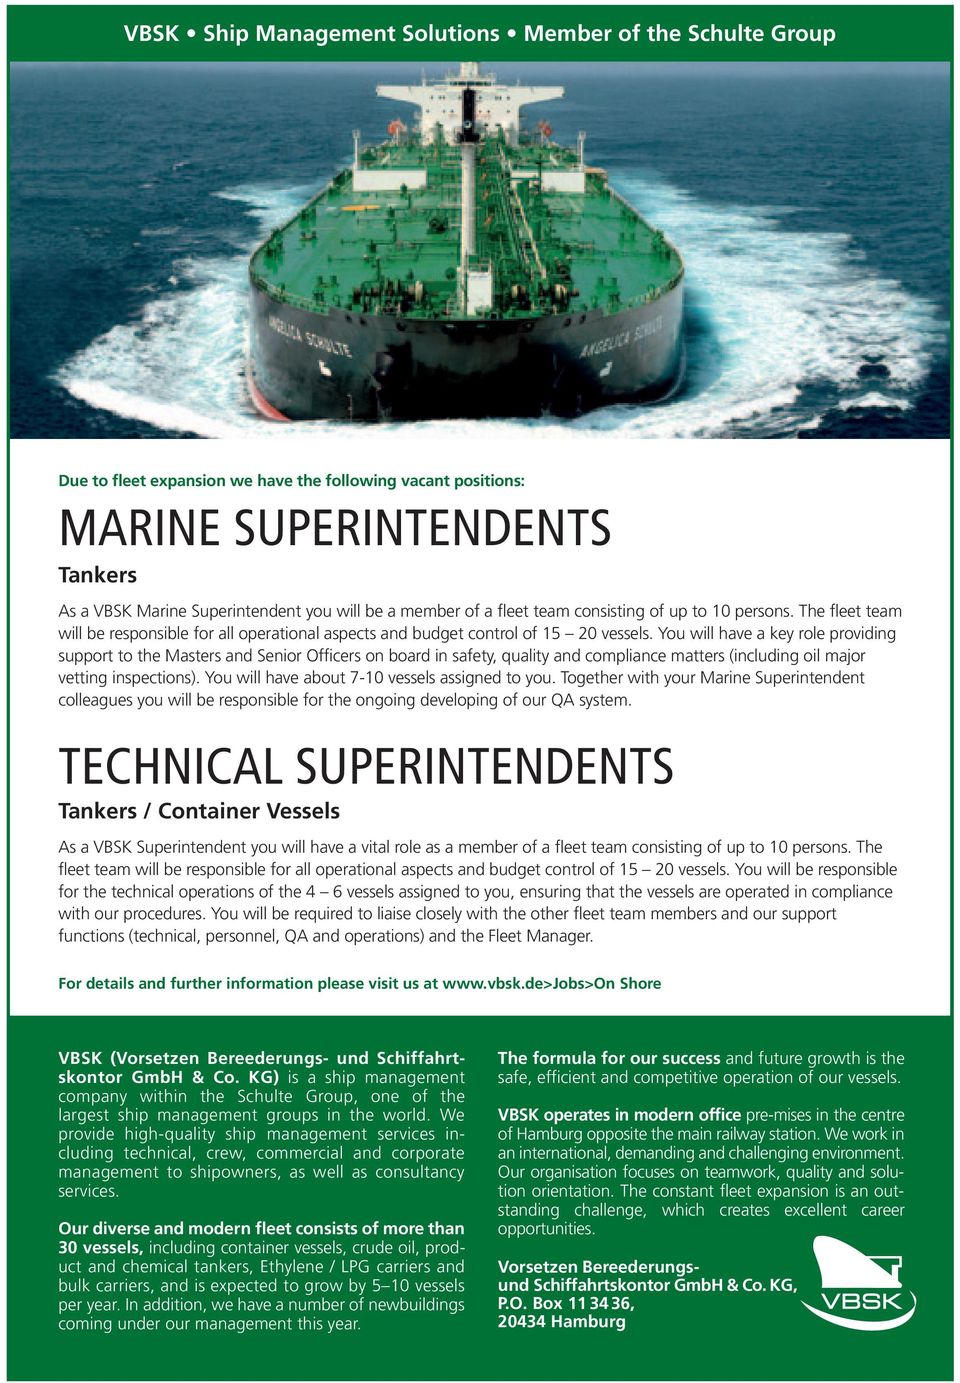 You will have a key role providing support to the Masters and Senior Officers on board in safety, quality and compliance matters (including oil major vetting inspections).